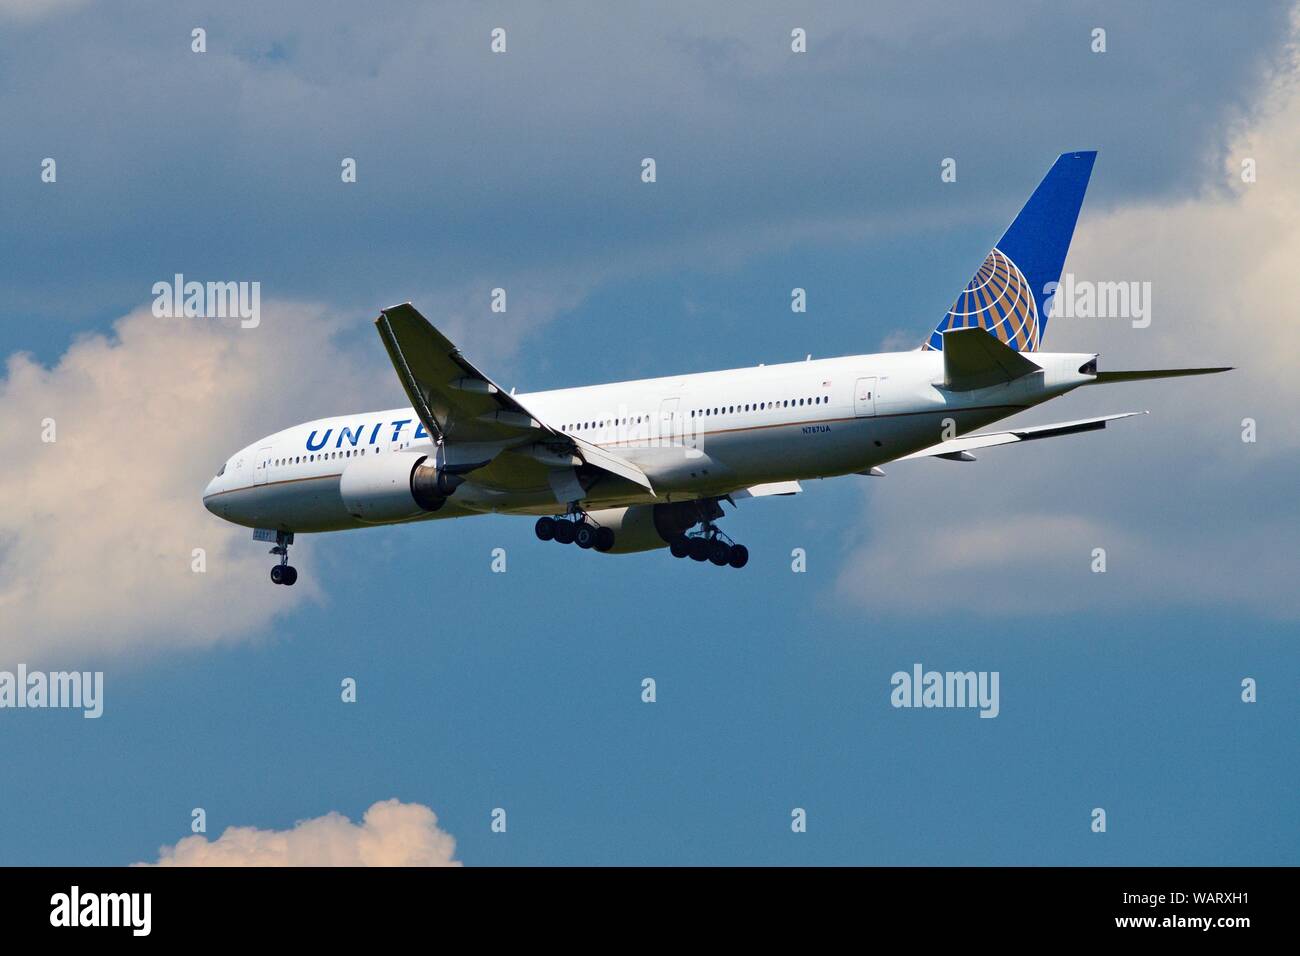 United Airlines Boeing 777-200ER landing at Dulles Airport Stock Photo